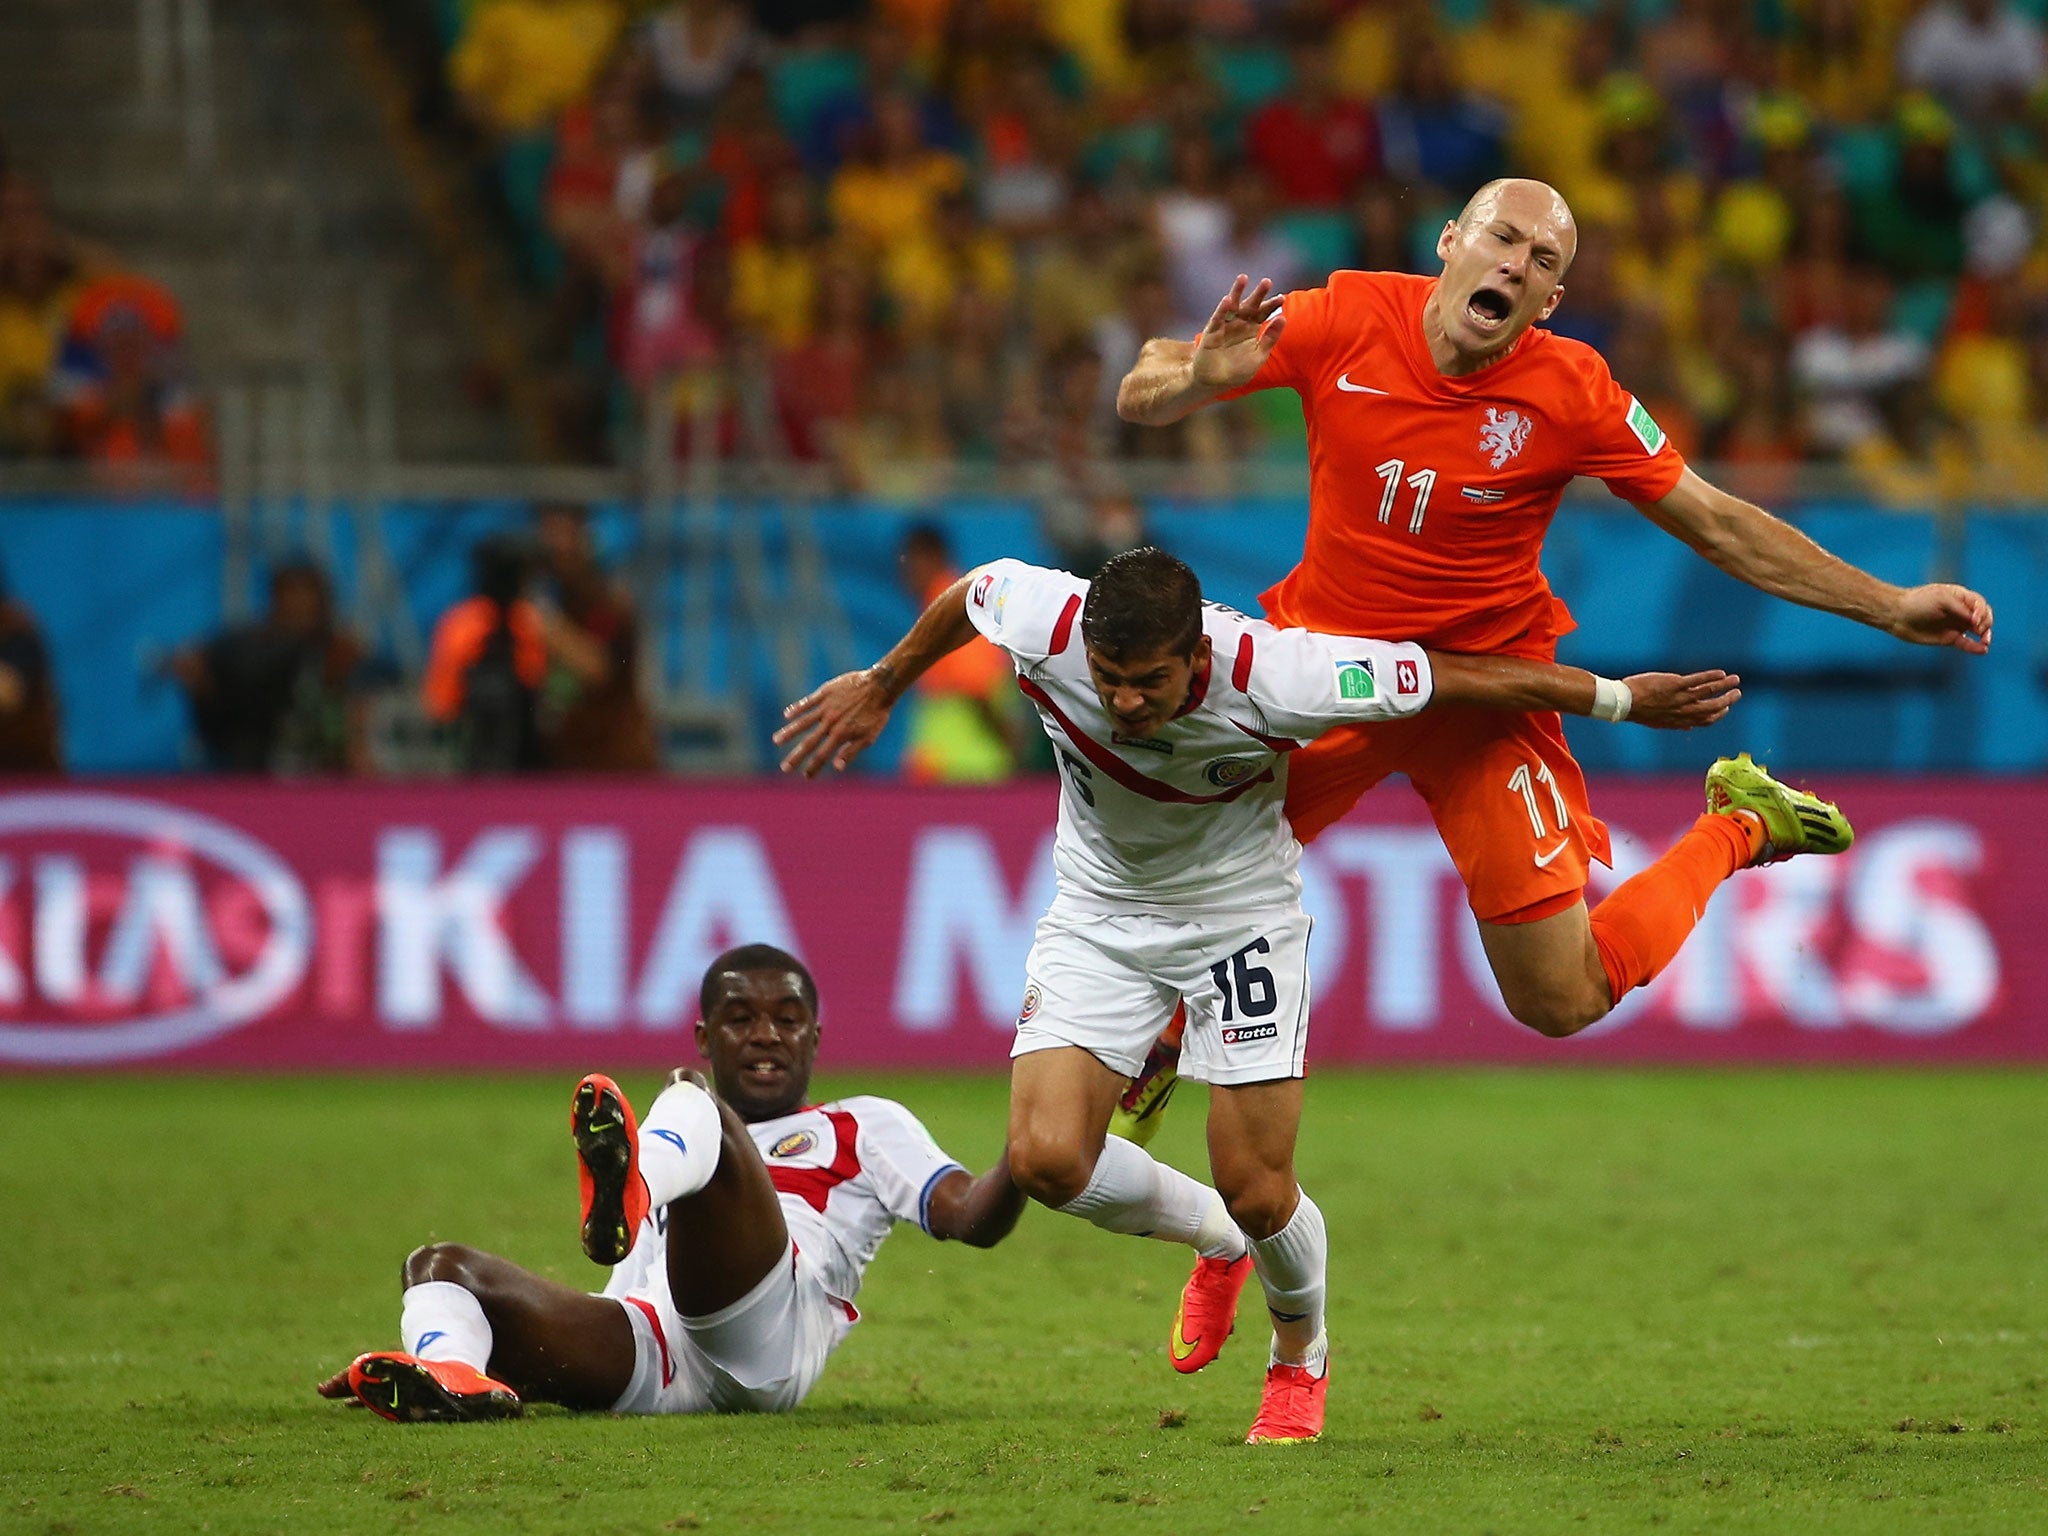 Robben goes over the challenge of two Costa Rica defenders